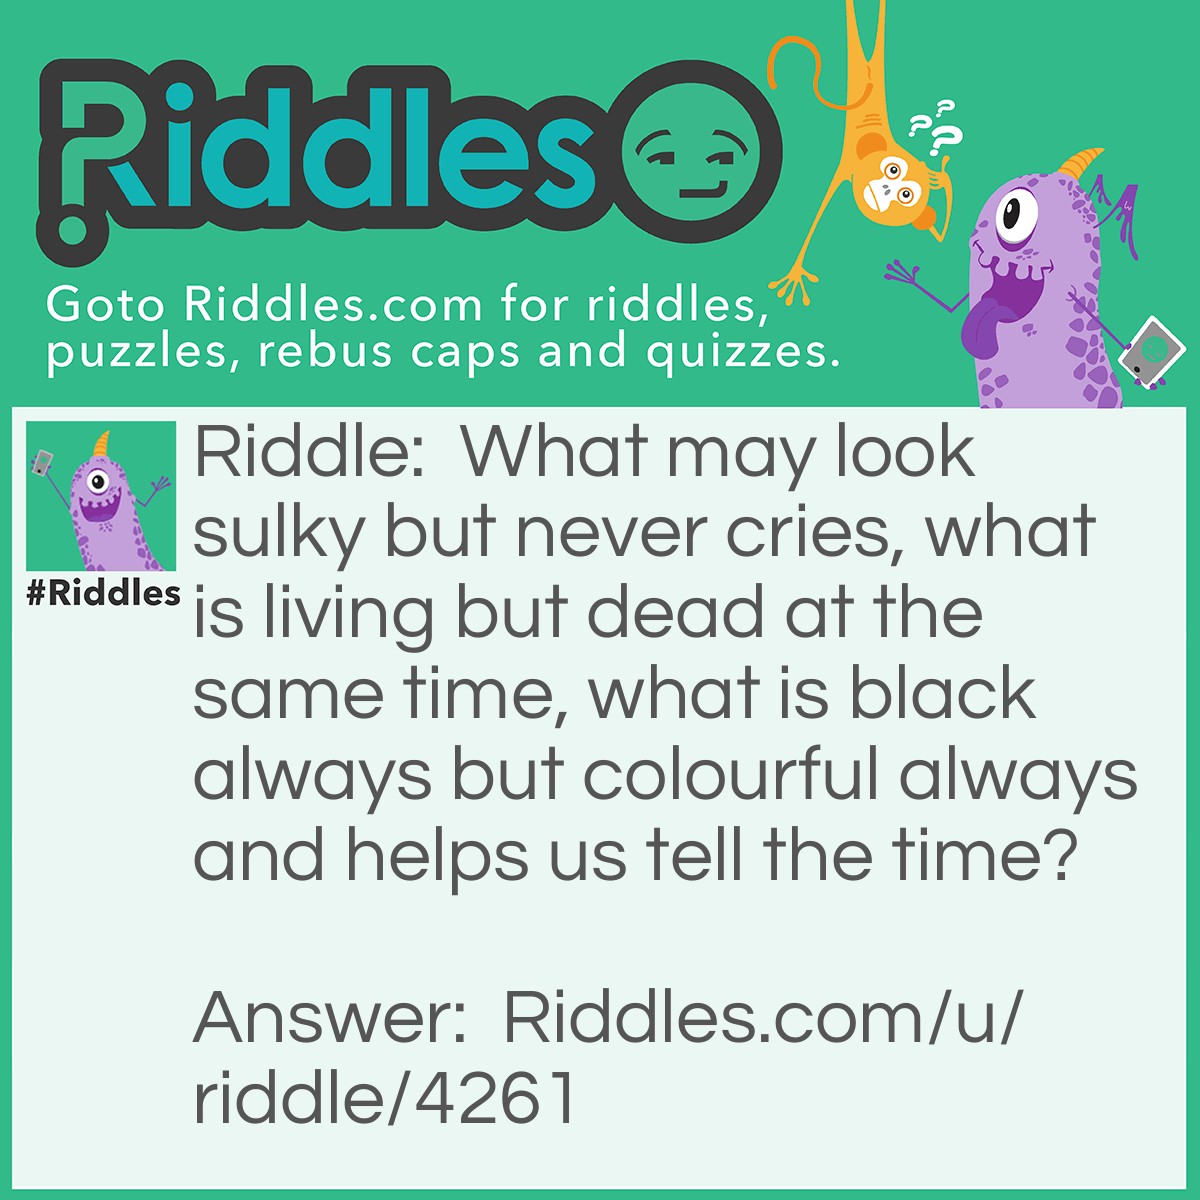 Riddle: What may look sulky but never cries, what is living but dead at the same time, what is black always but colourful always and helps us tell the time? Answer: A animal's shadow.